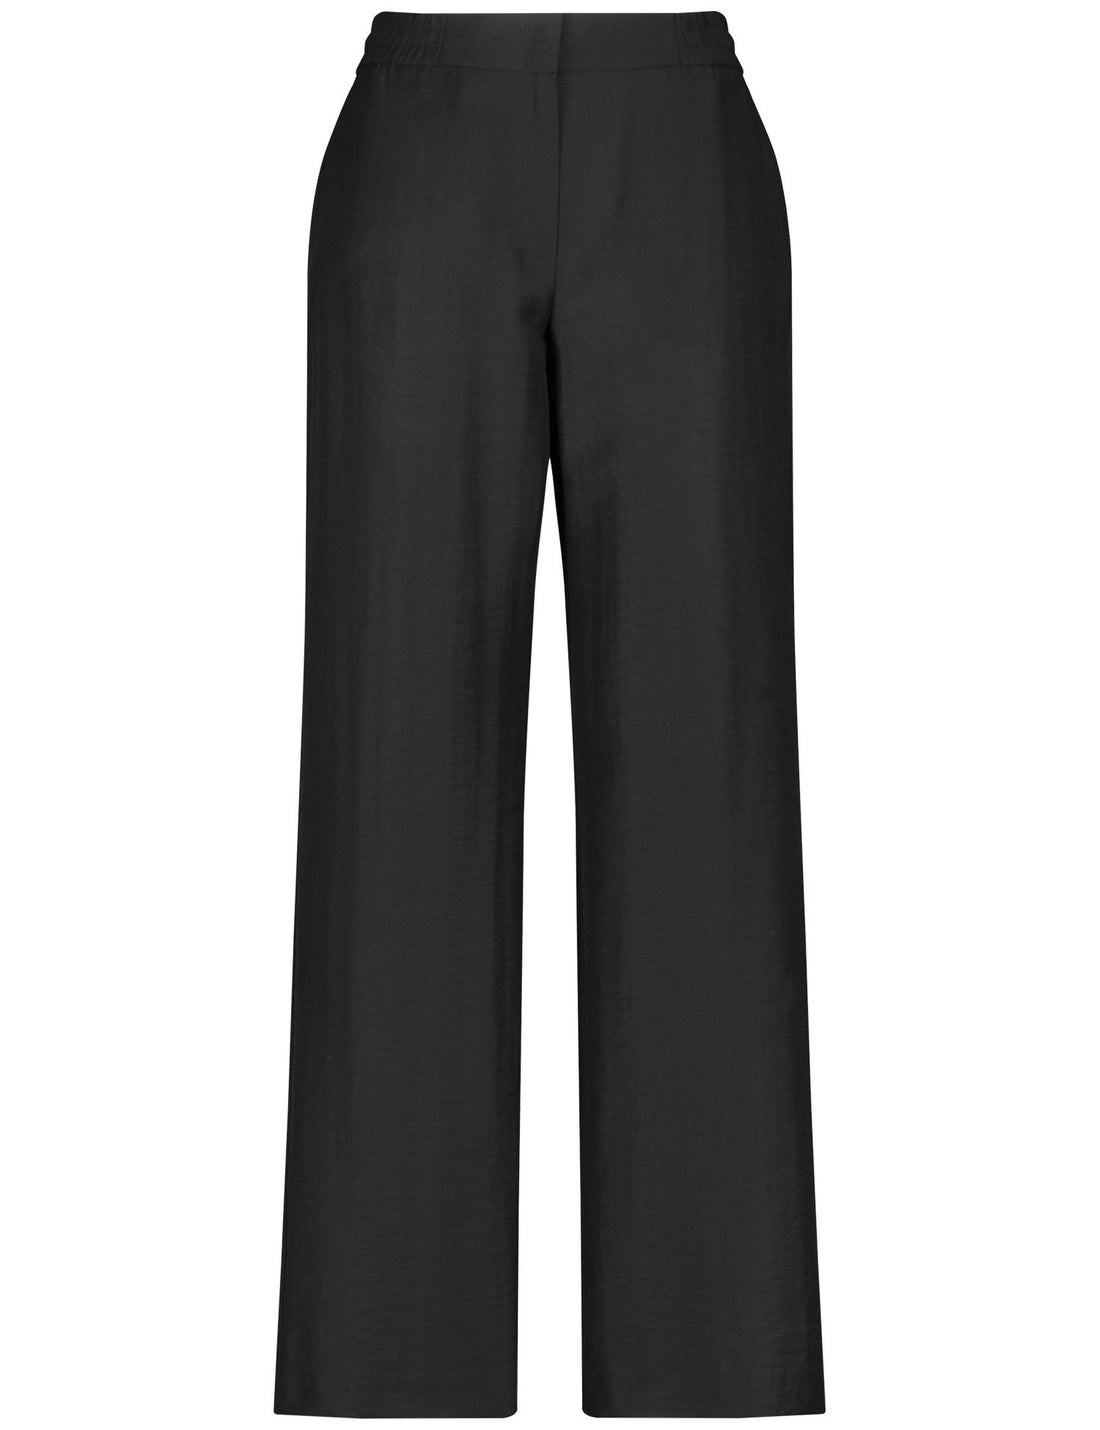 Flowing Trousers With A Stretch Waistband_320047-31354_11000_01